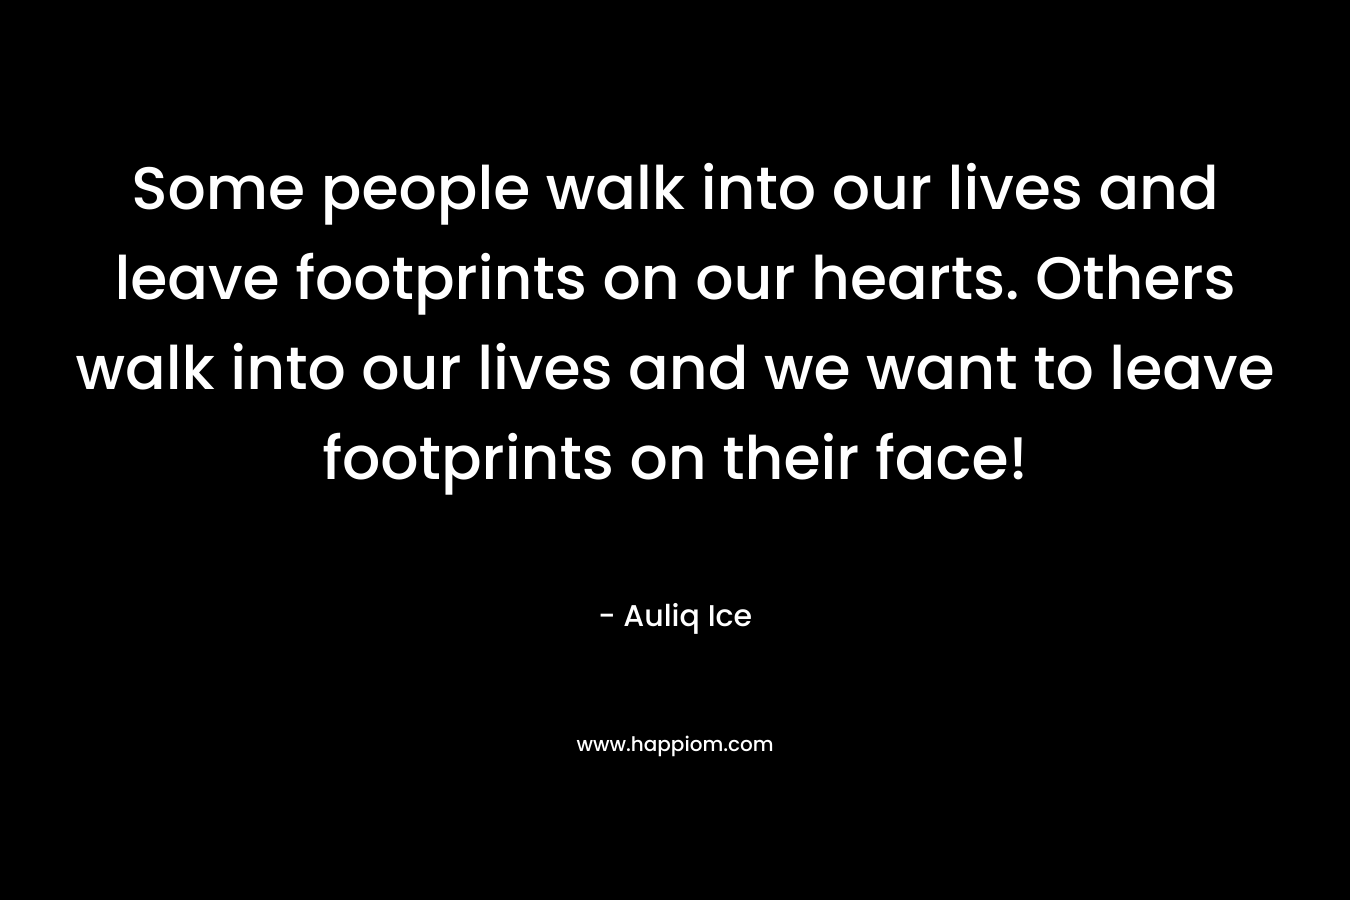 Some people walk into our lives and leave footprints on our hearts. Others walk into our lives and we want to leave footprints on their face!